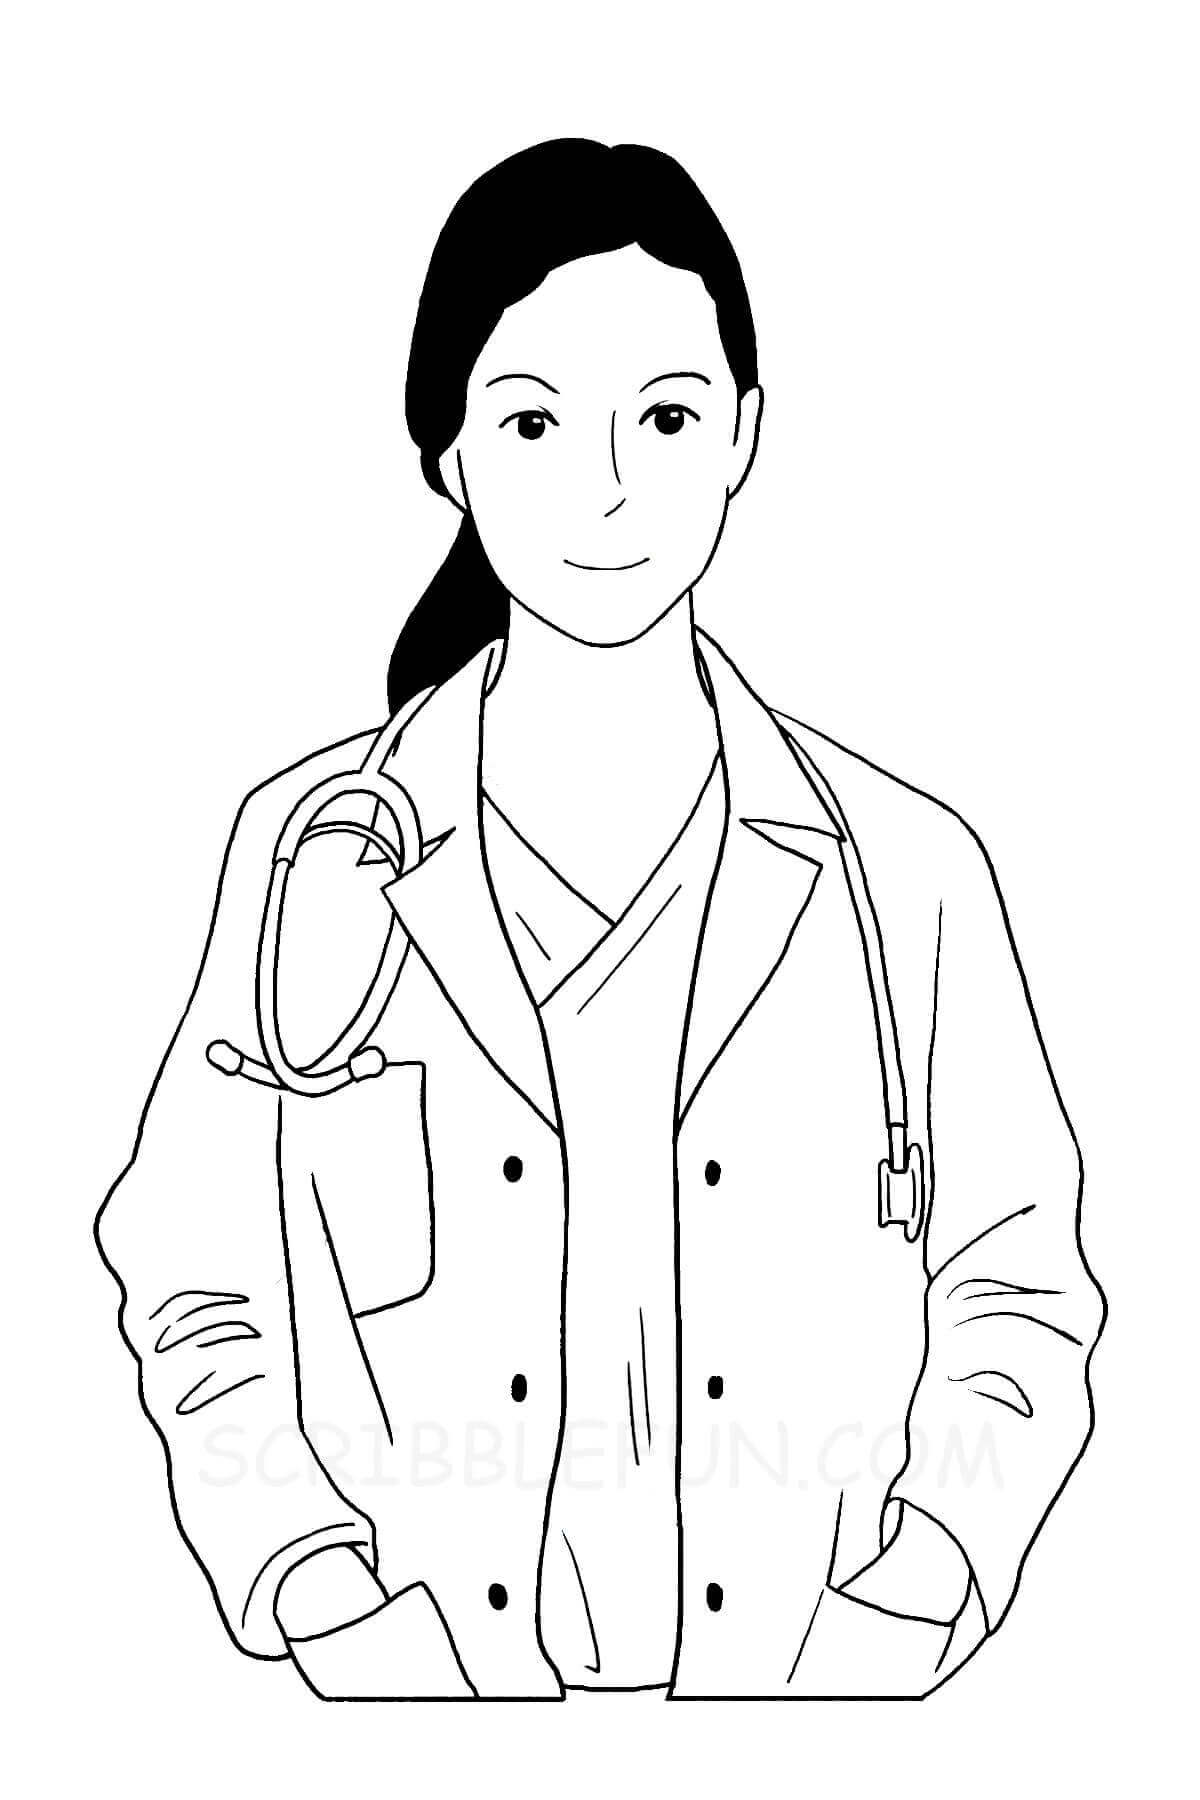 Doctor Community Helpers coloring page